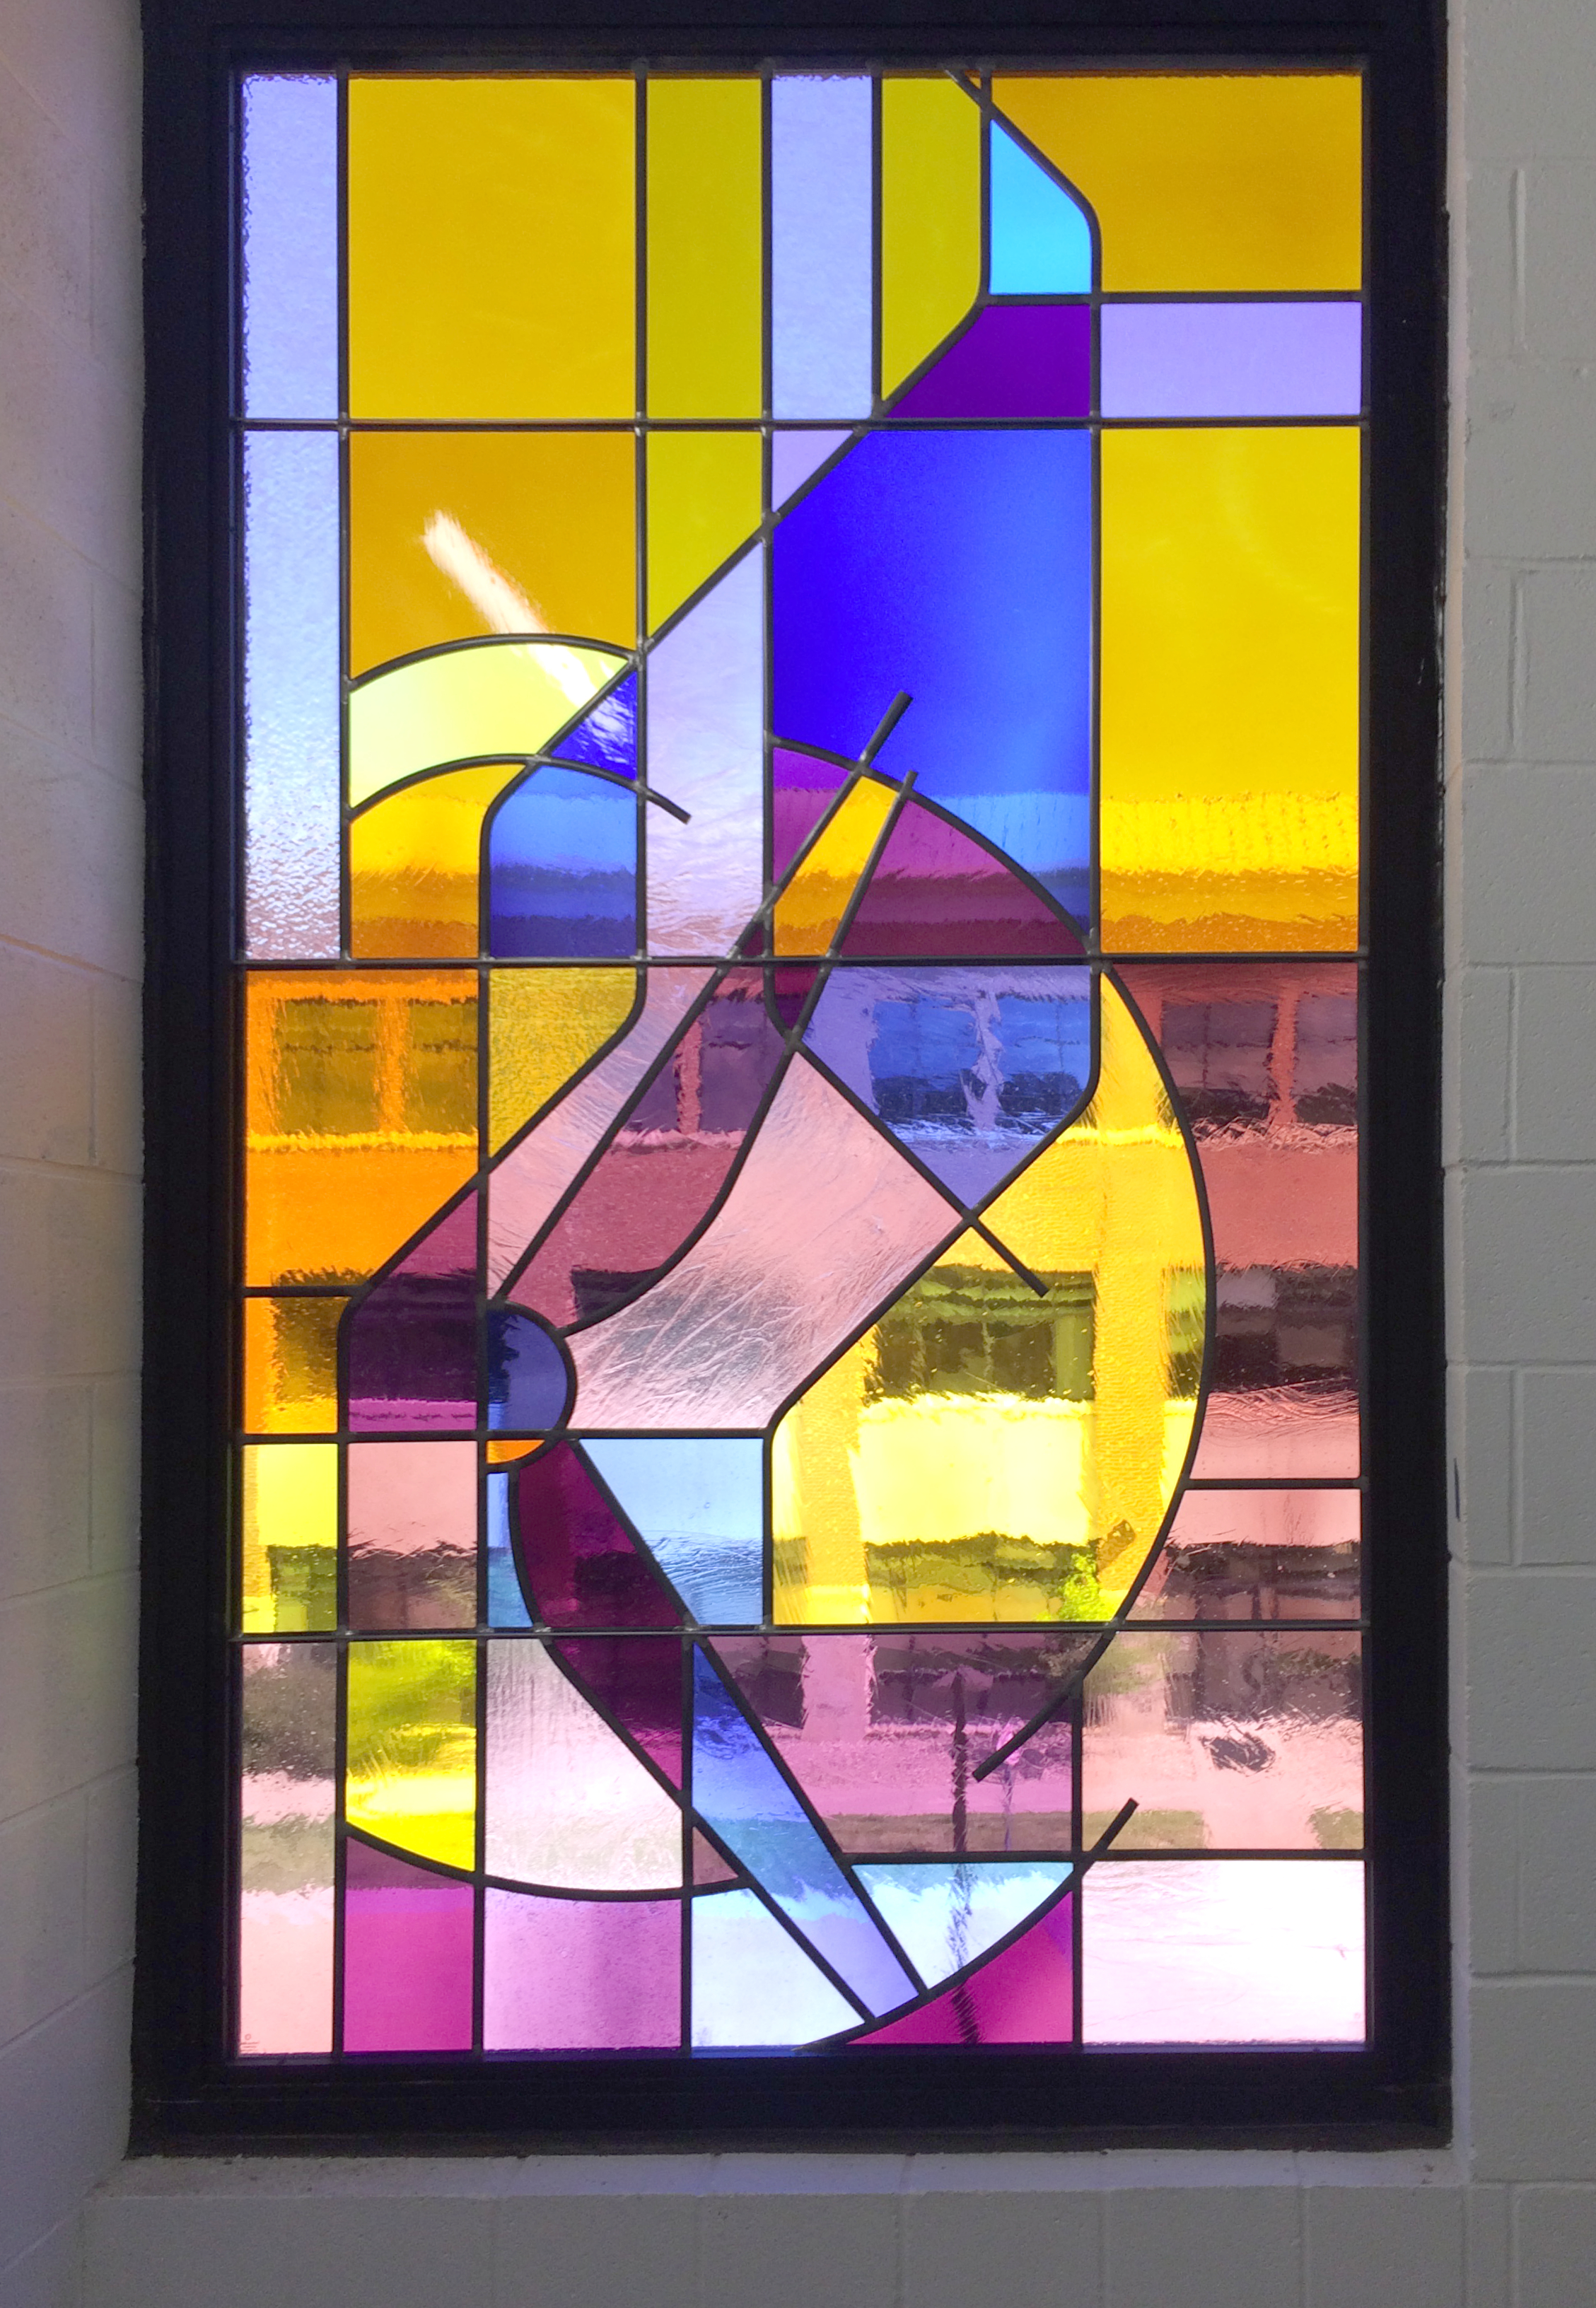  Stained glass in the stairwells by Creative Stained Glass Studio. 